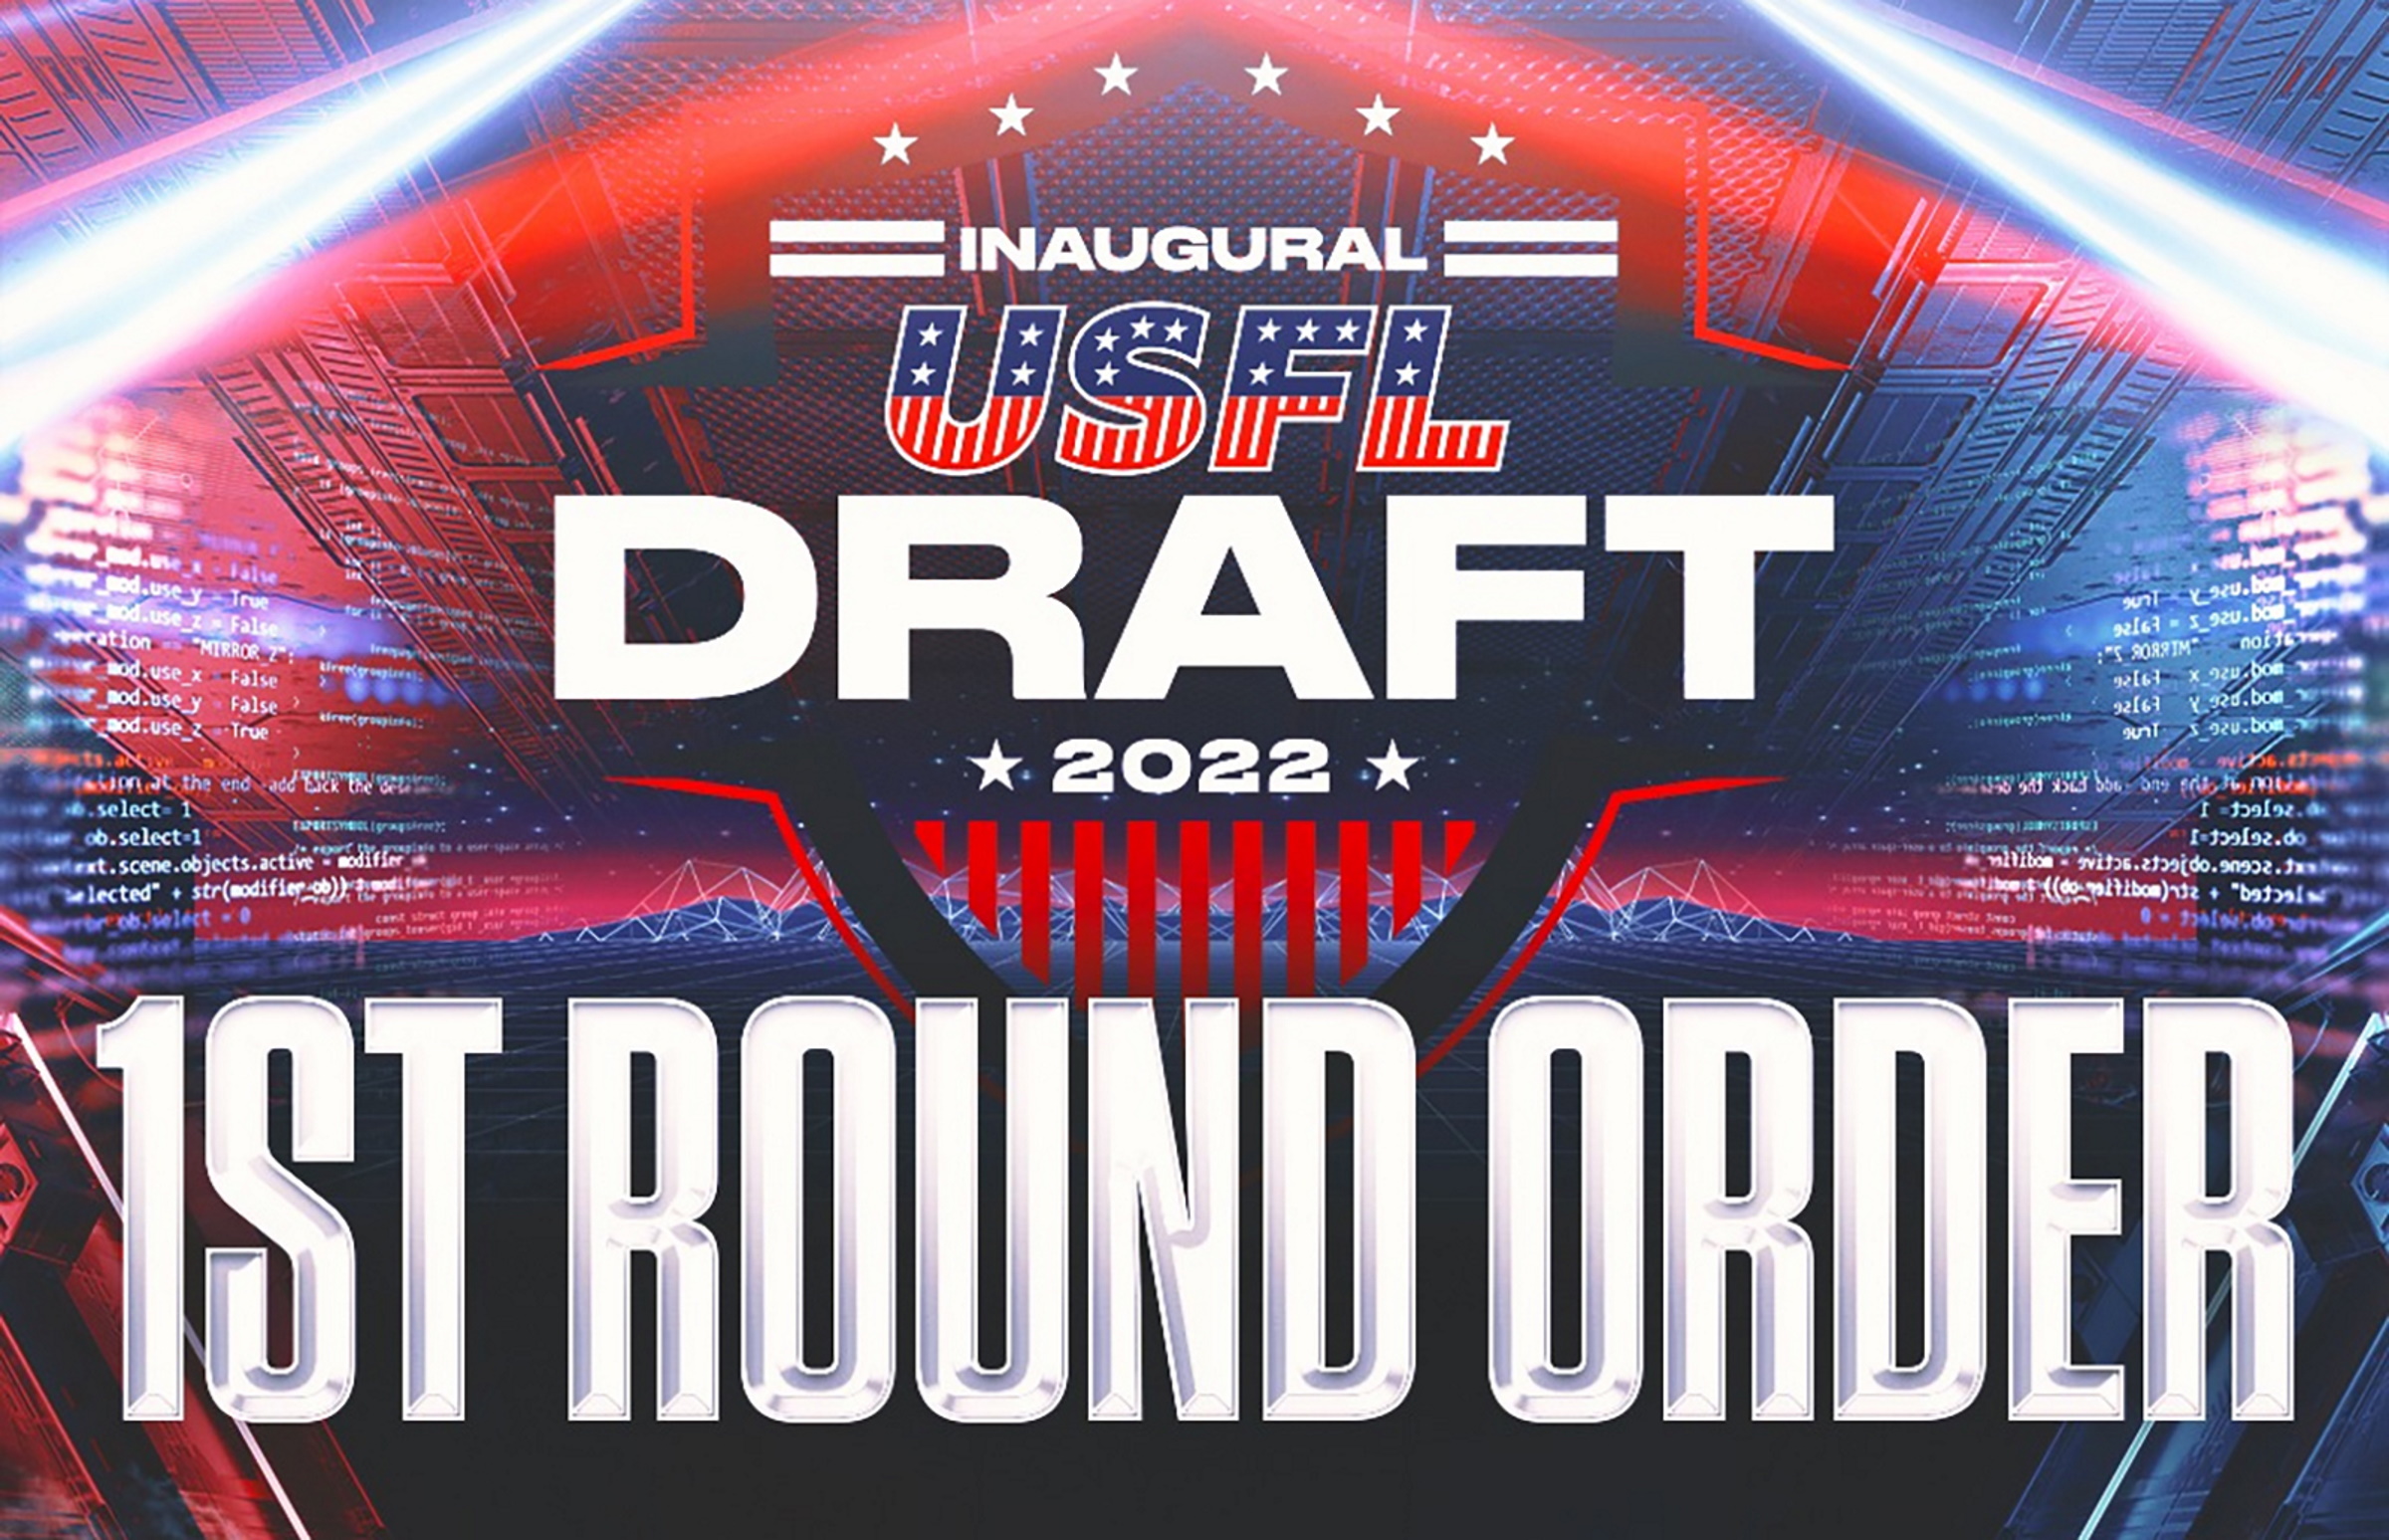 USFL Mock Draft 2022: All the best players by position: QBs to DBs